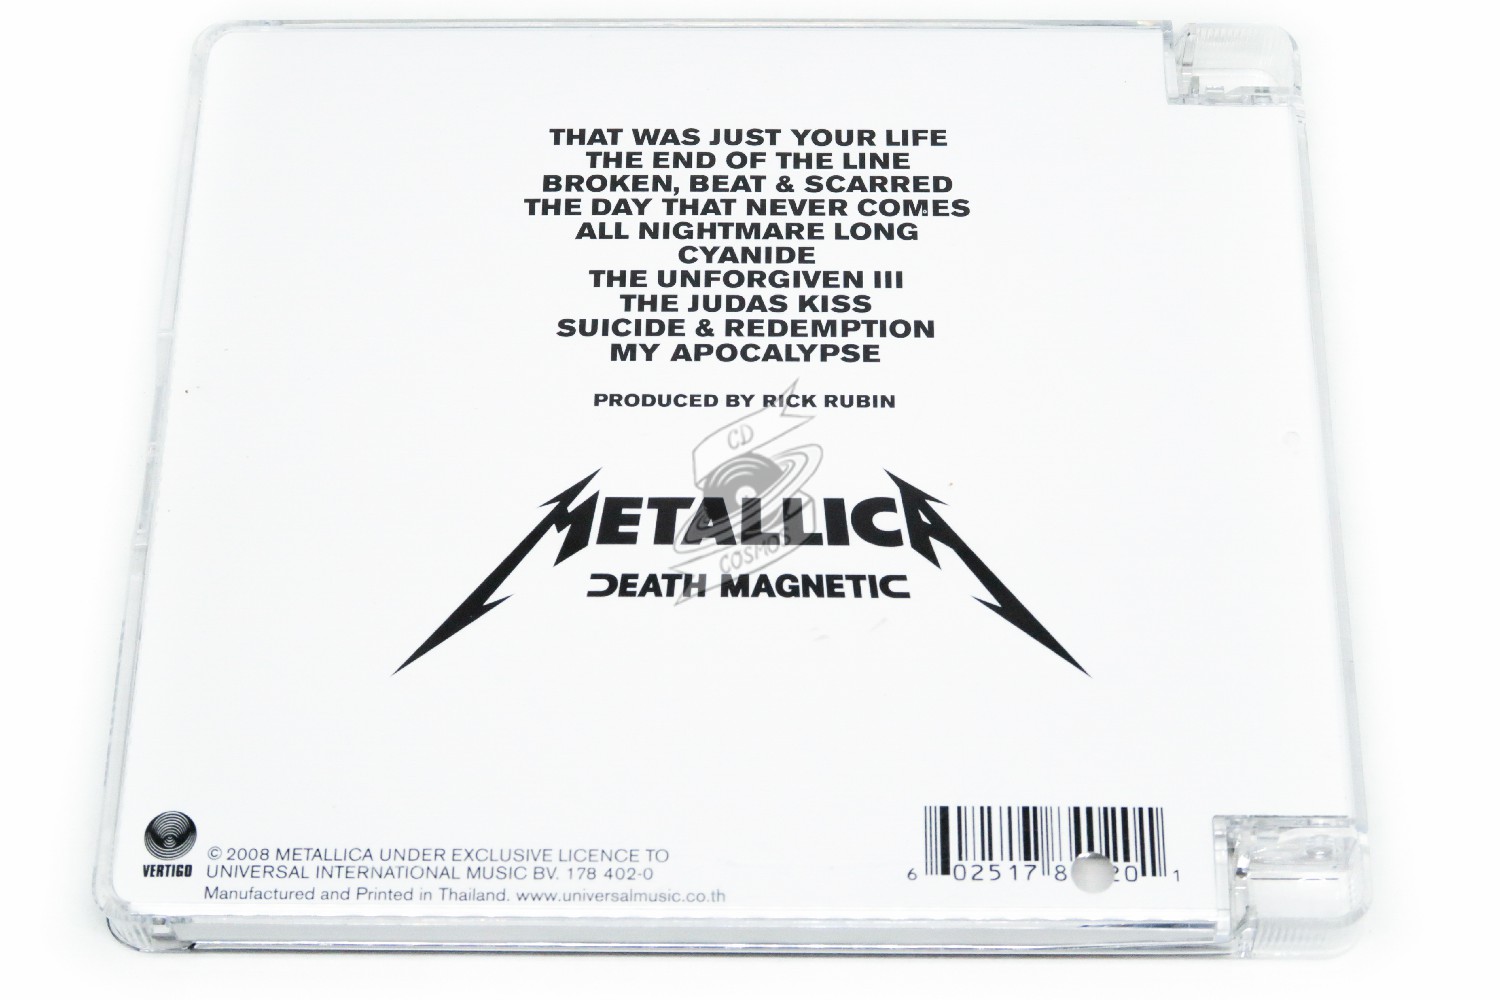 Metallica Discography: Death Magnetic